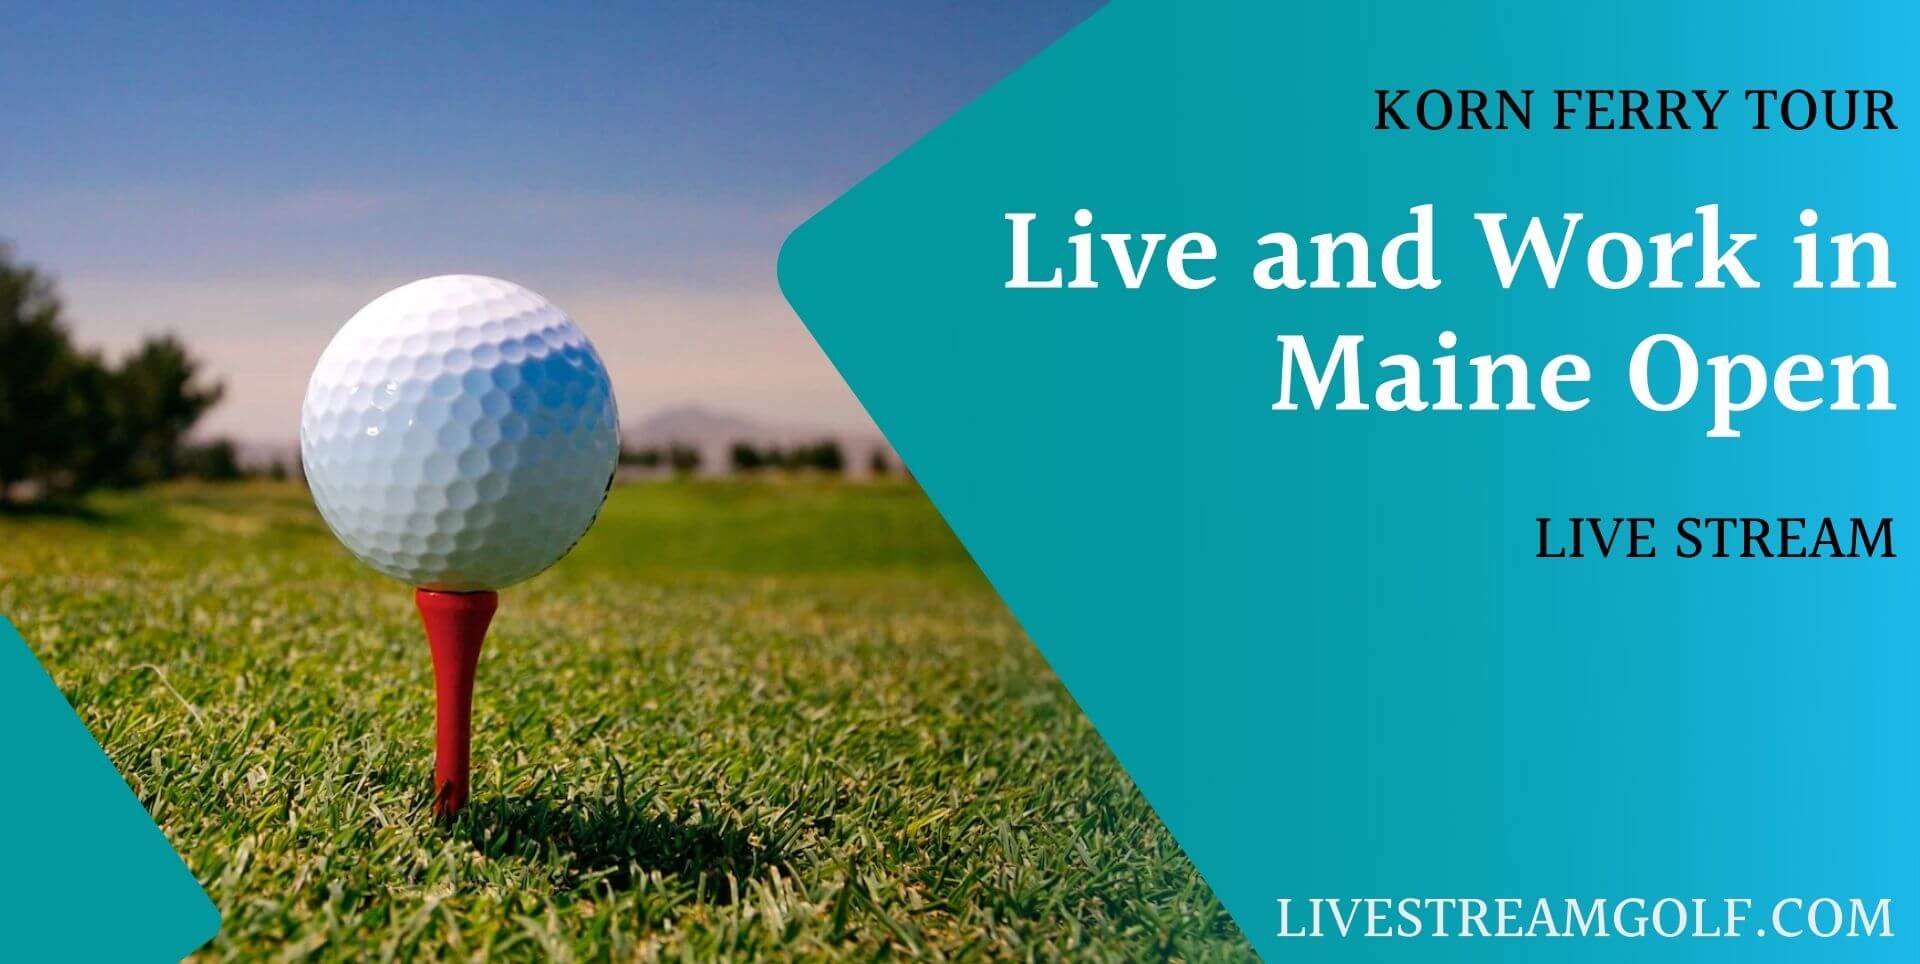 Live And Work In Maine Open Day 3 Live Stream: Korn Ferry 2022